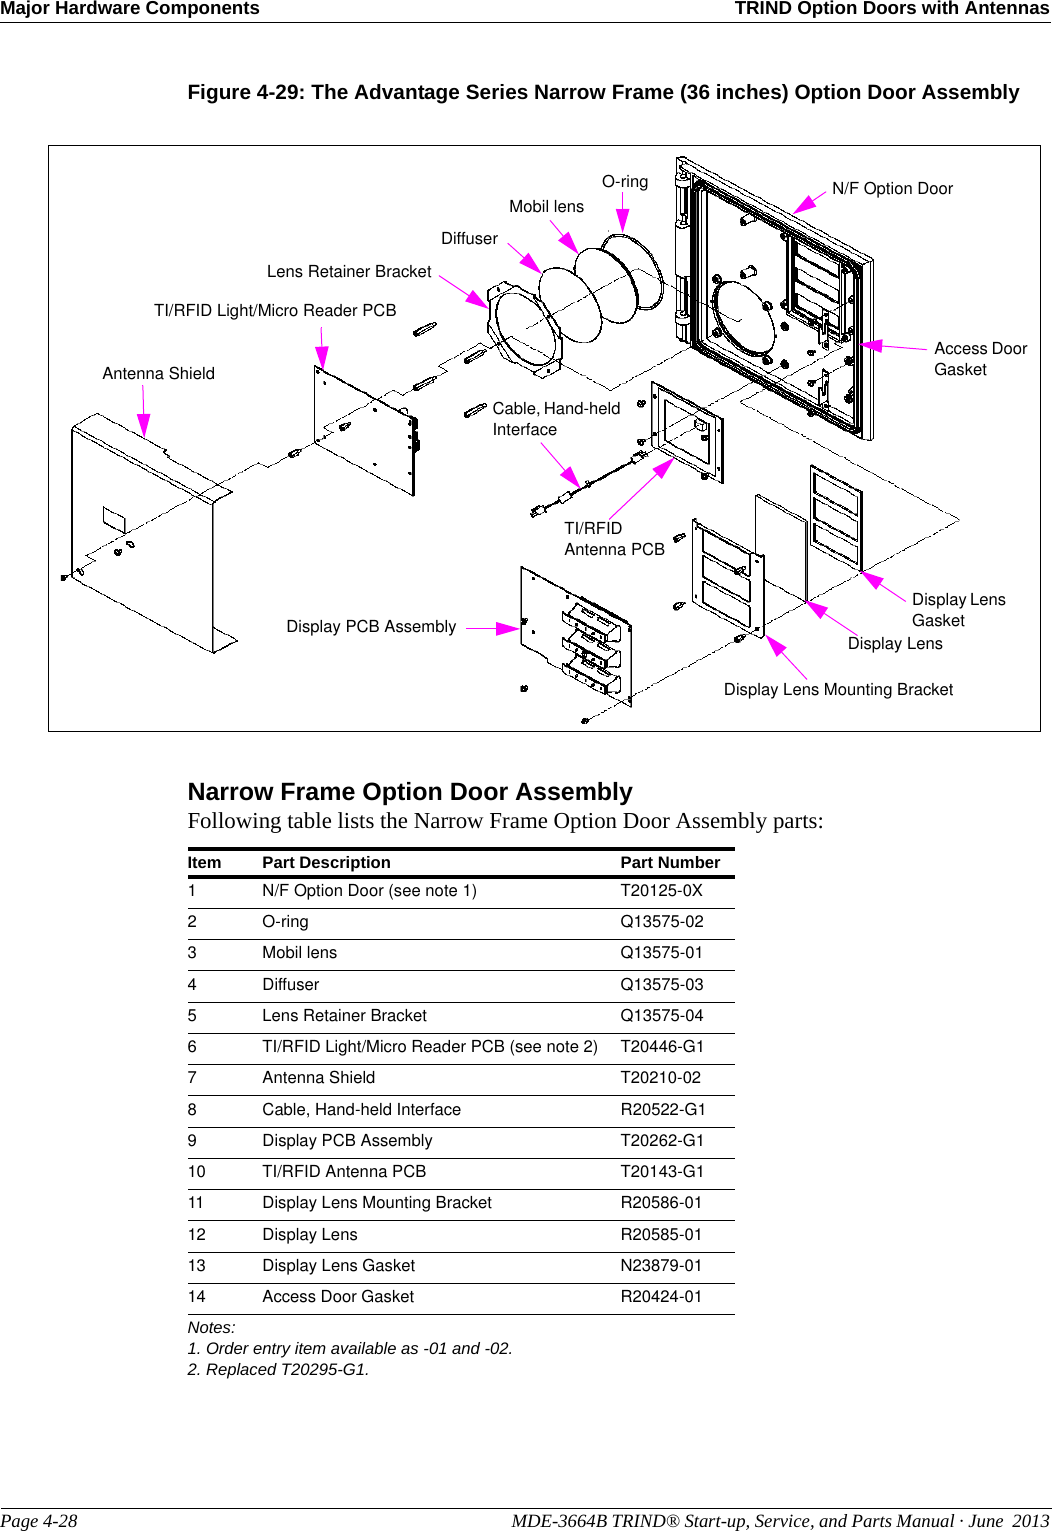 Major Hardware Components TRIND Option Doors with AntennasPage 4-28                                                                                                  MDE-3664B TRIND® Start-up, Service, and Parts Manual · June  2013Figure 4-29: The Advantage Series Narrow Frame (36 inches) Option Door AssemblyAccess Door GasketN/F Option DoorO-ringMobil lensDiffuserLens Retainer BracketTI/RFID Light/Micro Reader PCBAntenna ShieldCable, Hand-held InterfaceTI/RFID Antenna PCBDisplay PCB Assembly Display LensDisplay Lens Mounting BracketDisplay Lens GasketNarrow Frame Option Door AssemblyItem Part Description Part Number1N/F Option Door (see note 1) T20125-0X2O-ring Q13575-023Mobil lens Q13575-014Diffuser Q13575-035Lens Retainer Bracket Q13575-046TI/RFID Light/Micro Reader PCB (see note 2) T20446-G17Antenna Shield T20210-028Cable, Hand-held Interface R20522-G19Display PCB Assembly T20262-G110 TI/RFID Antenna PCB T20143-G111 Display Lens Mounting Bracket R20586-0112 Display Lens R20585-0113 Display Lens Gasket N23879-0114 Access Door Gasket R20424-01Notes:1. Order entry item available as -01 and -02.2. Replaced T20295-G1.Following table lists the Narrow Frame Option Door Assembly parts: